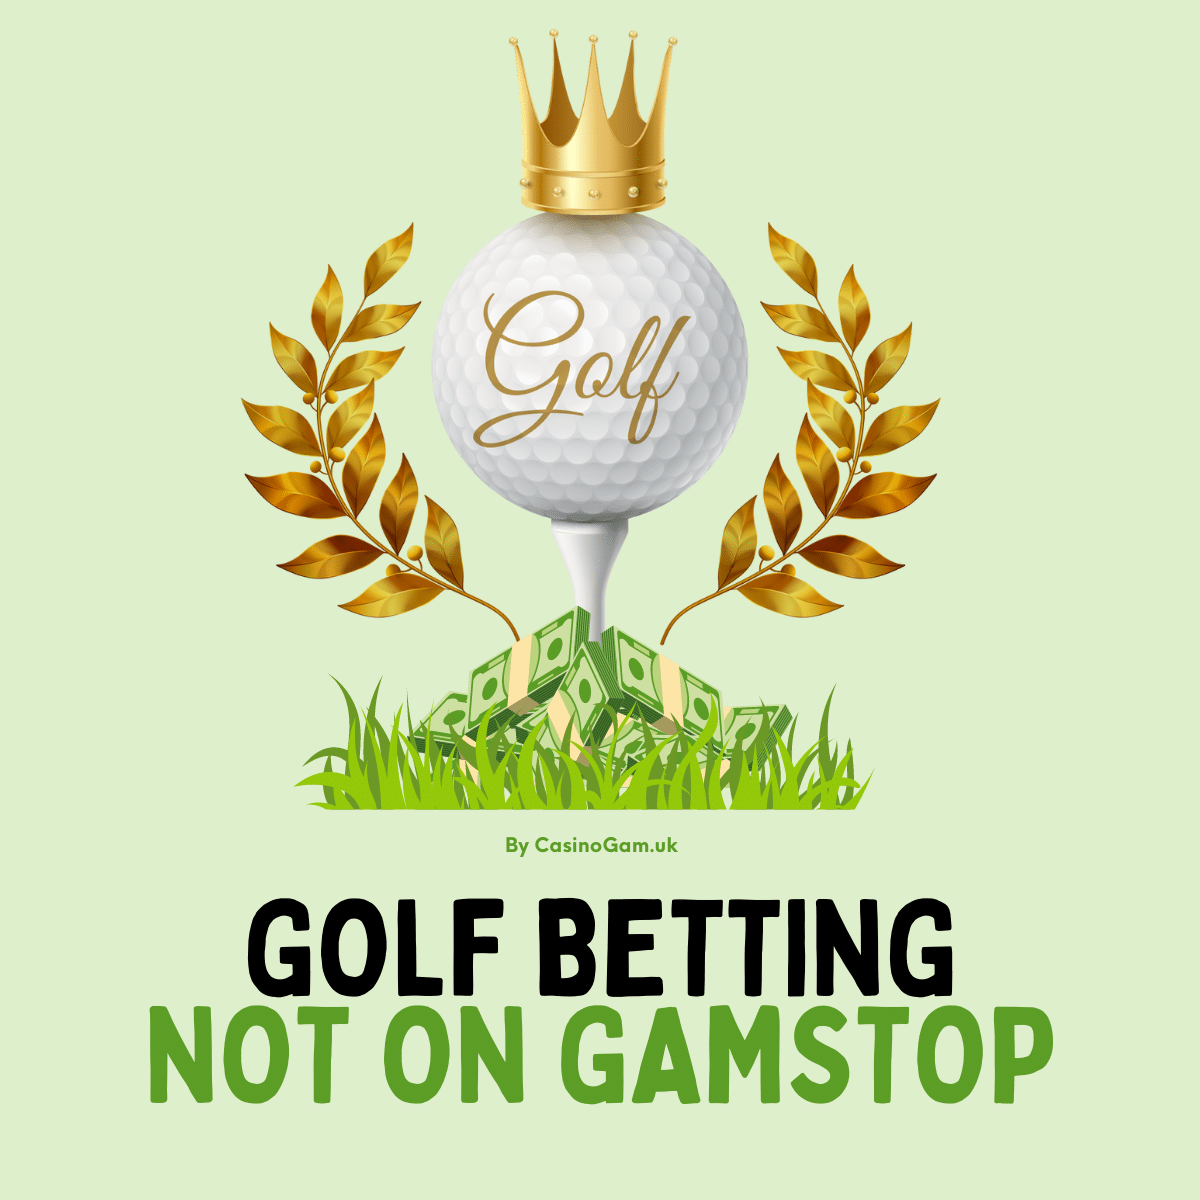 Photo: golf betting not on gamstop